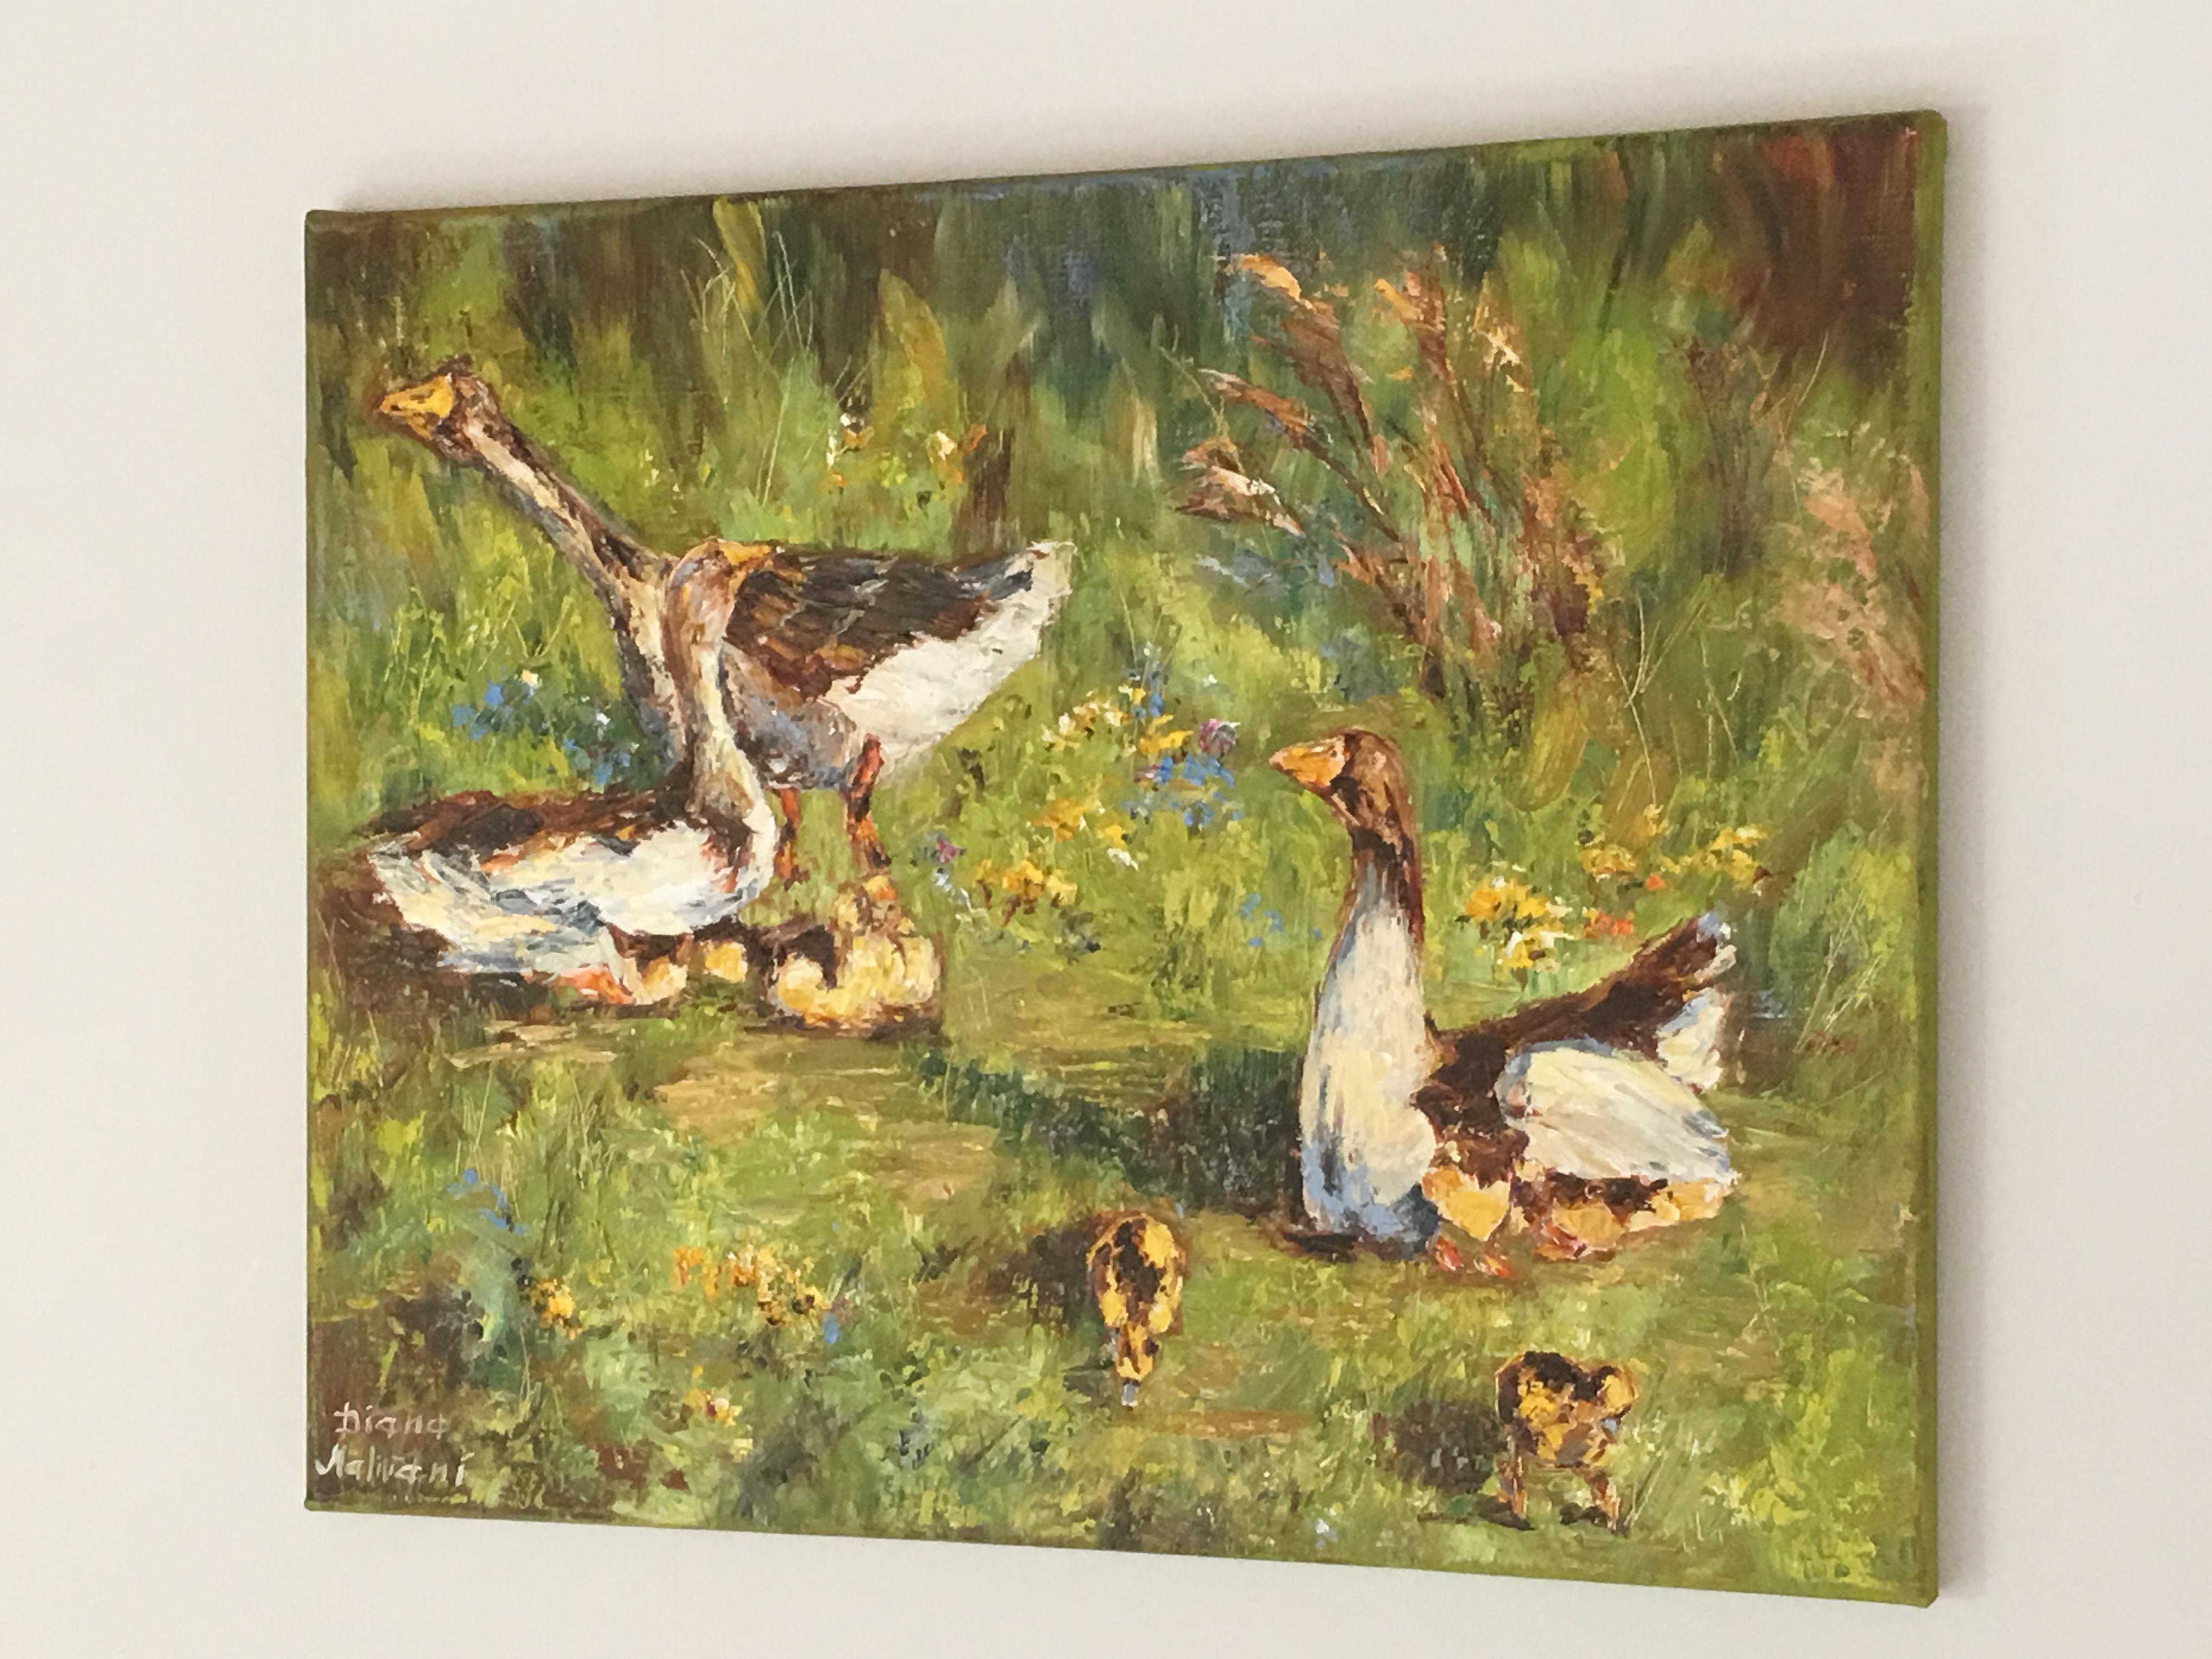 Geese, Painting, Oil on Canvas 1